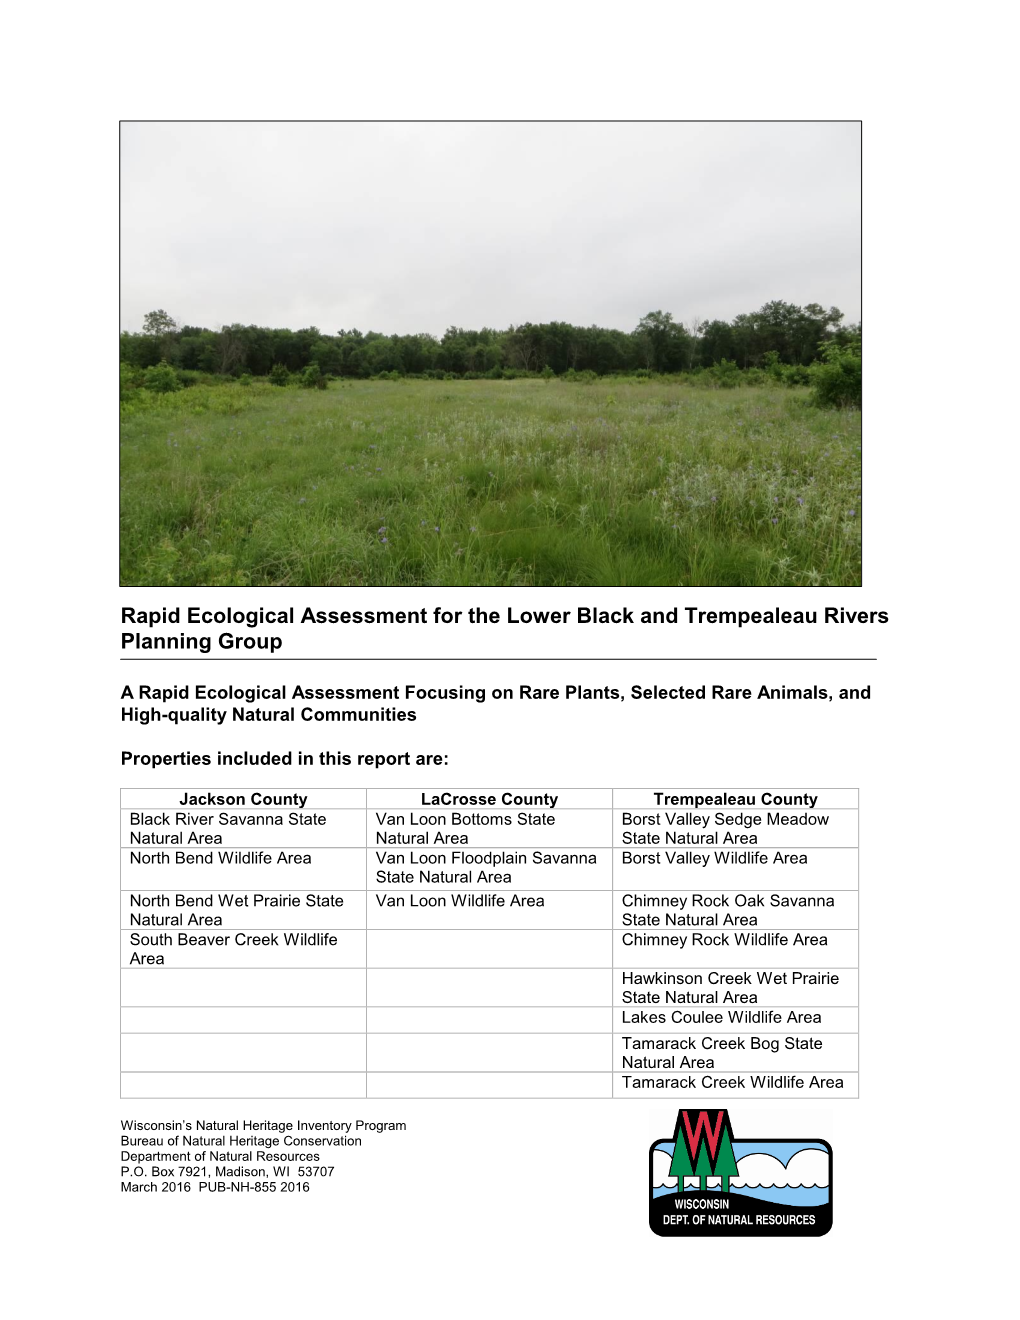 Rapid Ecological Assessment for Lower Black and Trempealeau